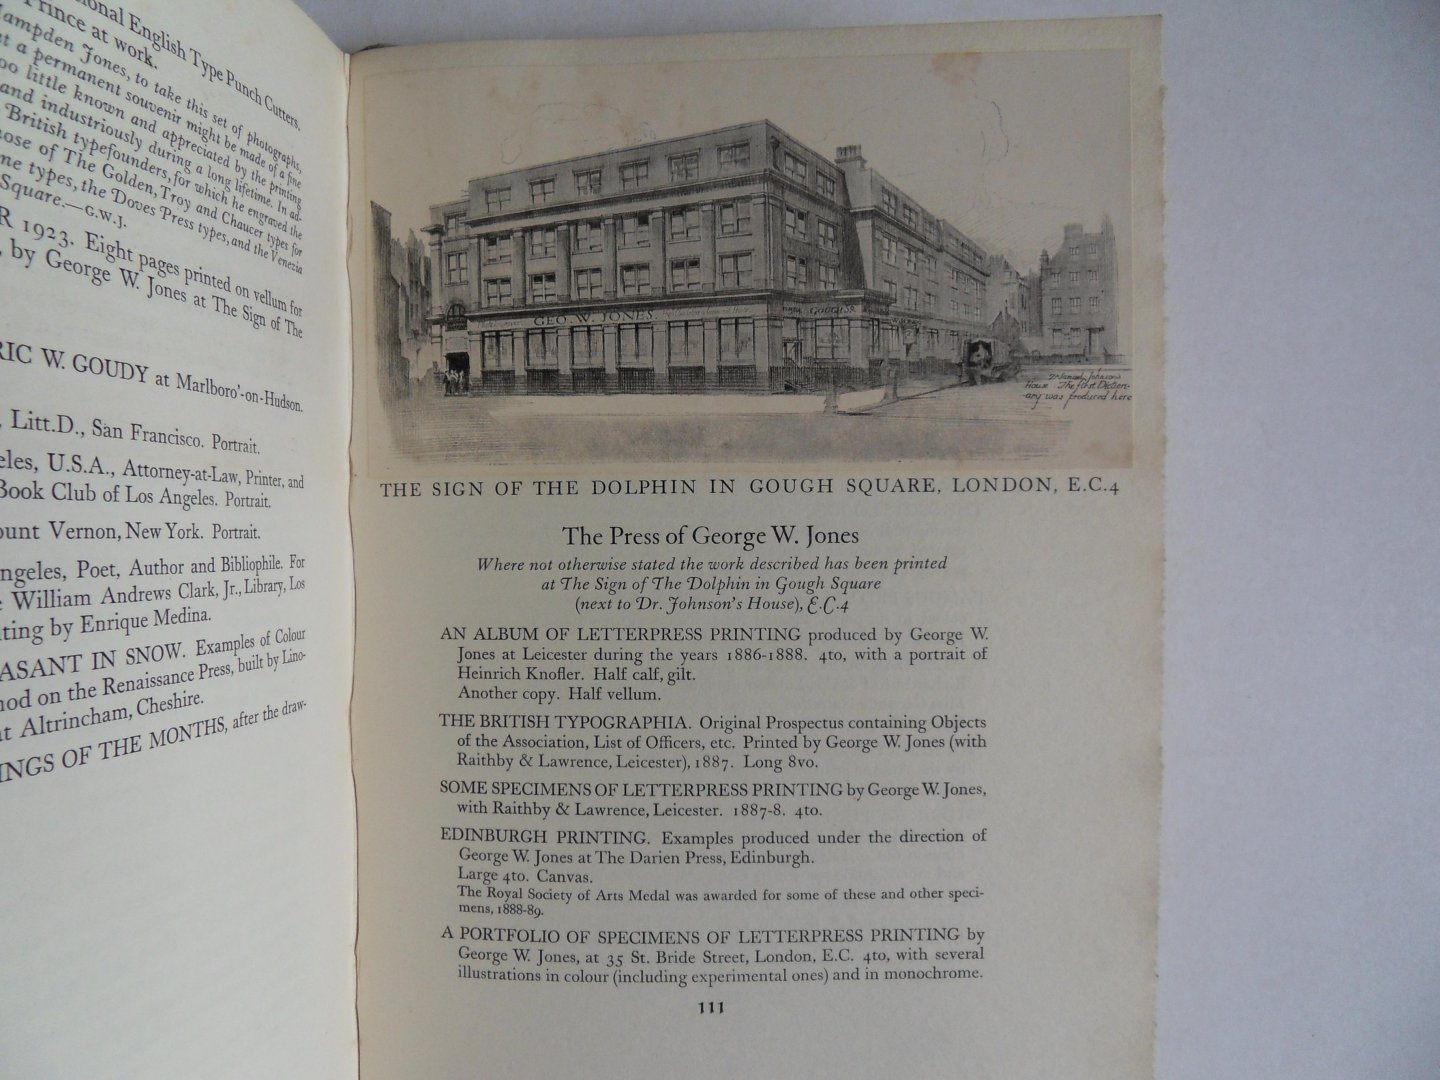 Jones, George W. [ Gesigneerd - zie foto 6 ]. - Catalogue of the Library of George W. Jones at the Sign of the Dolphin. Next to dr. Johnson`s House in Gough Square Fleet Street London..